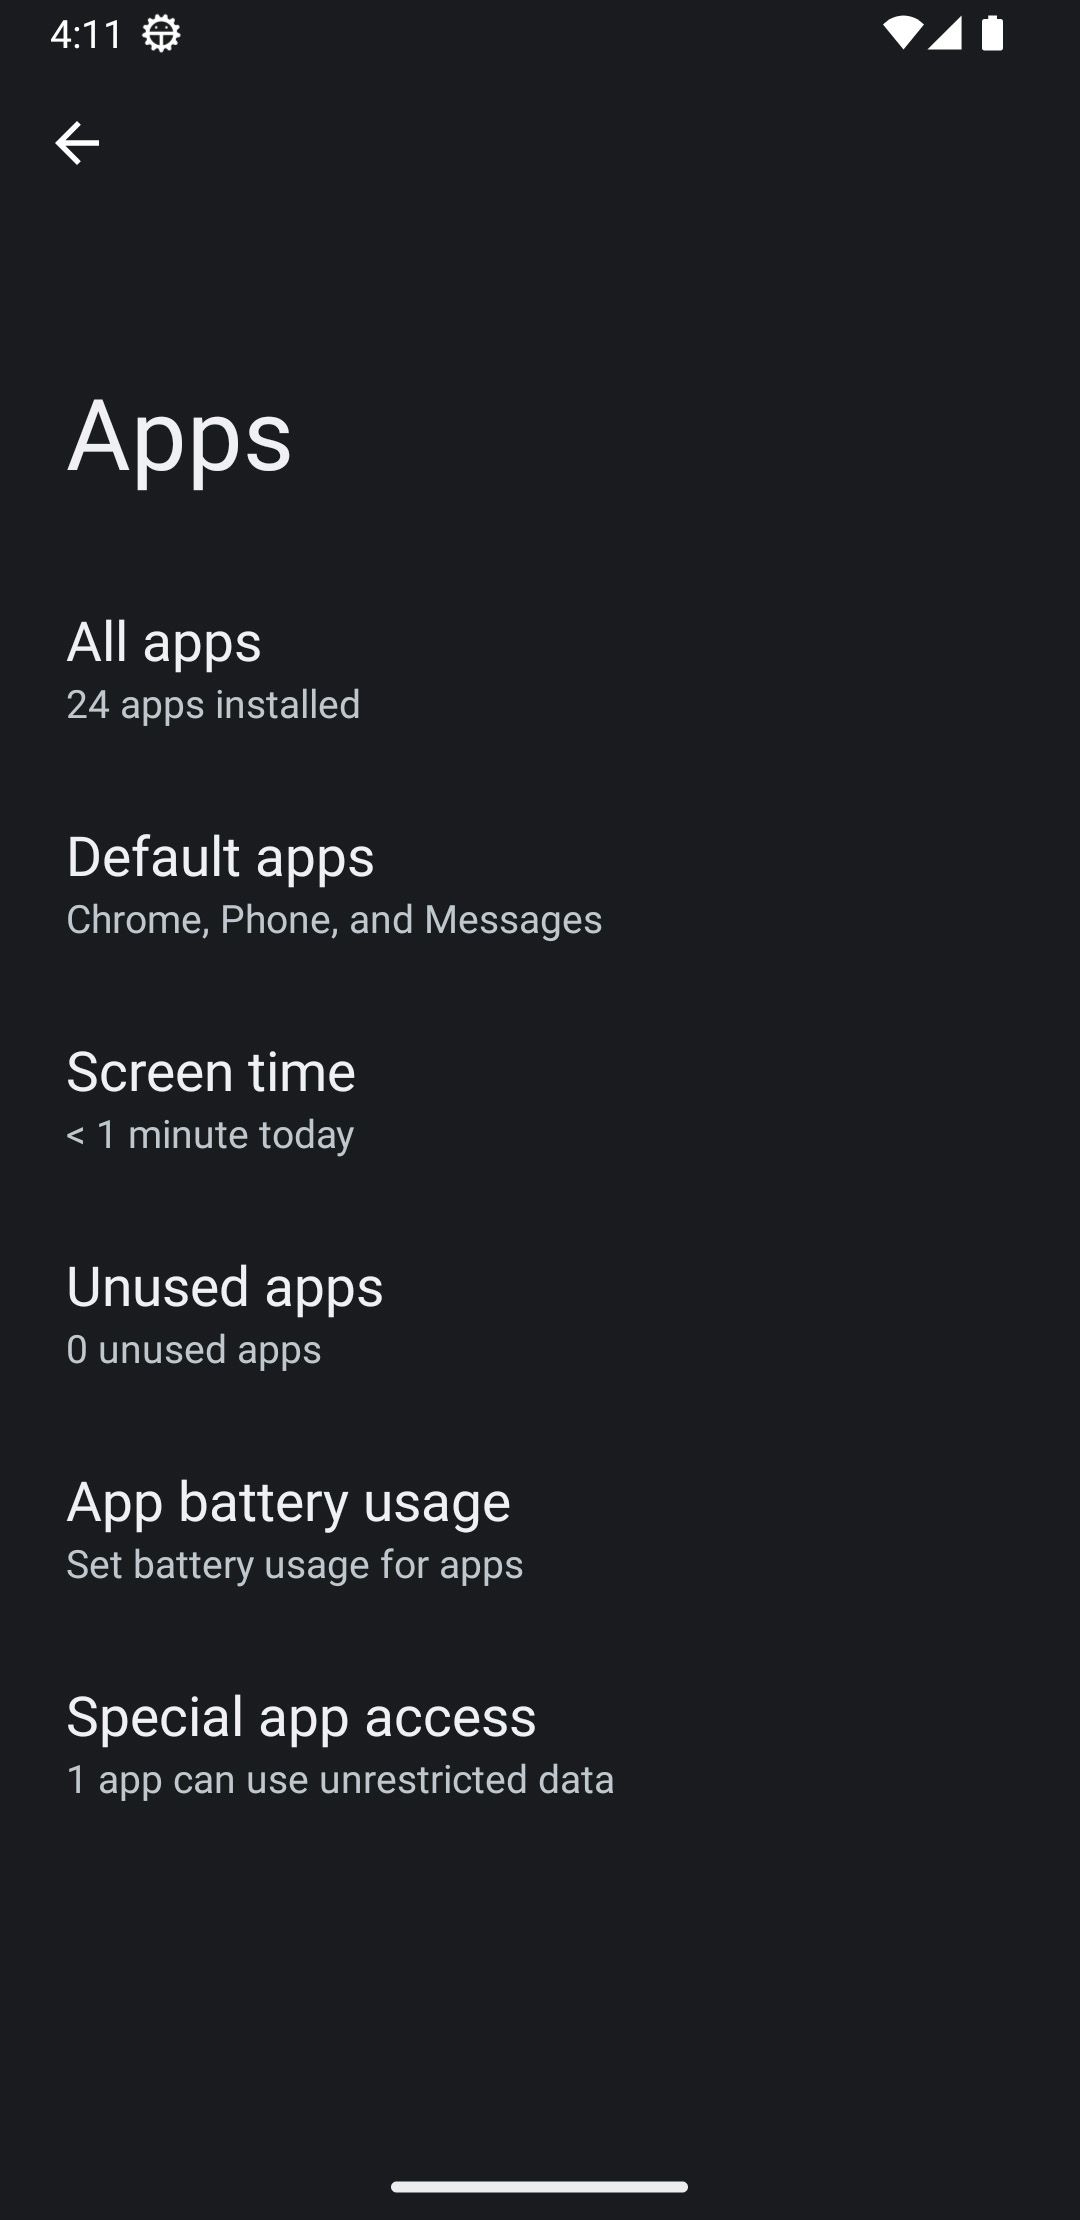 All apps option in the app menu